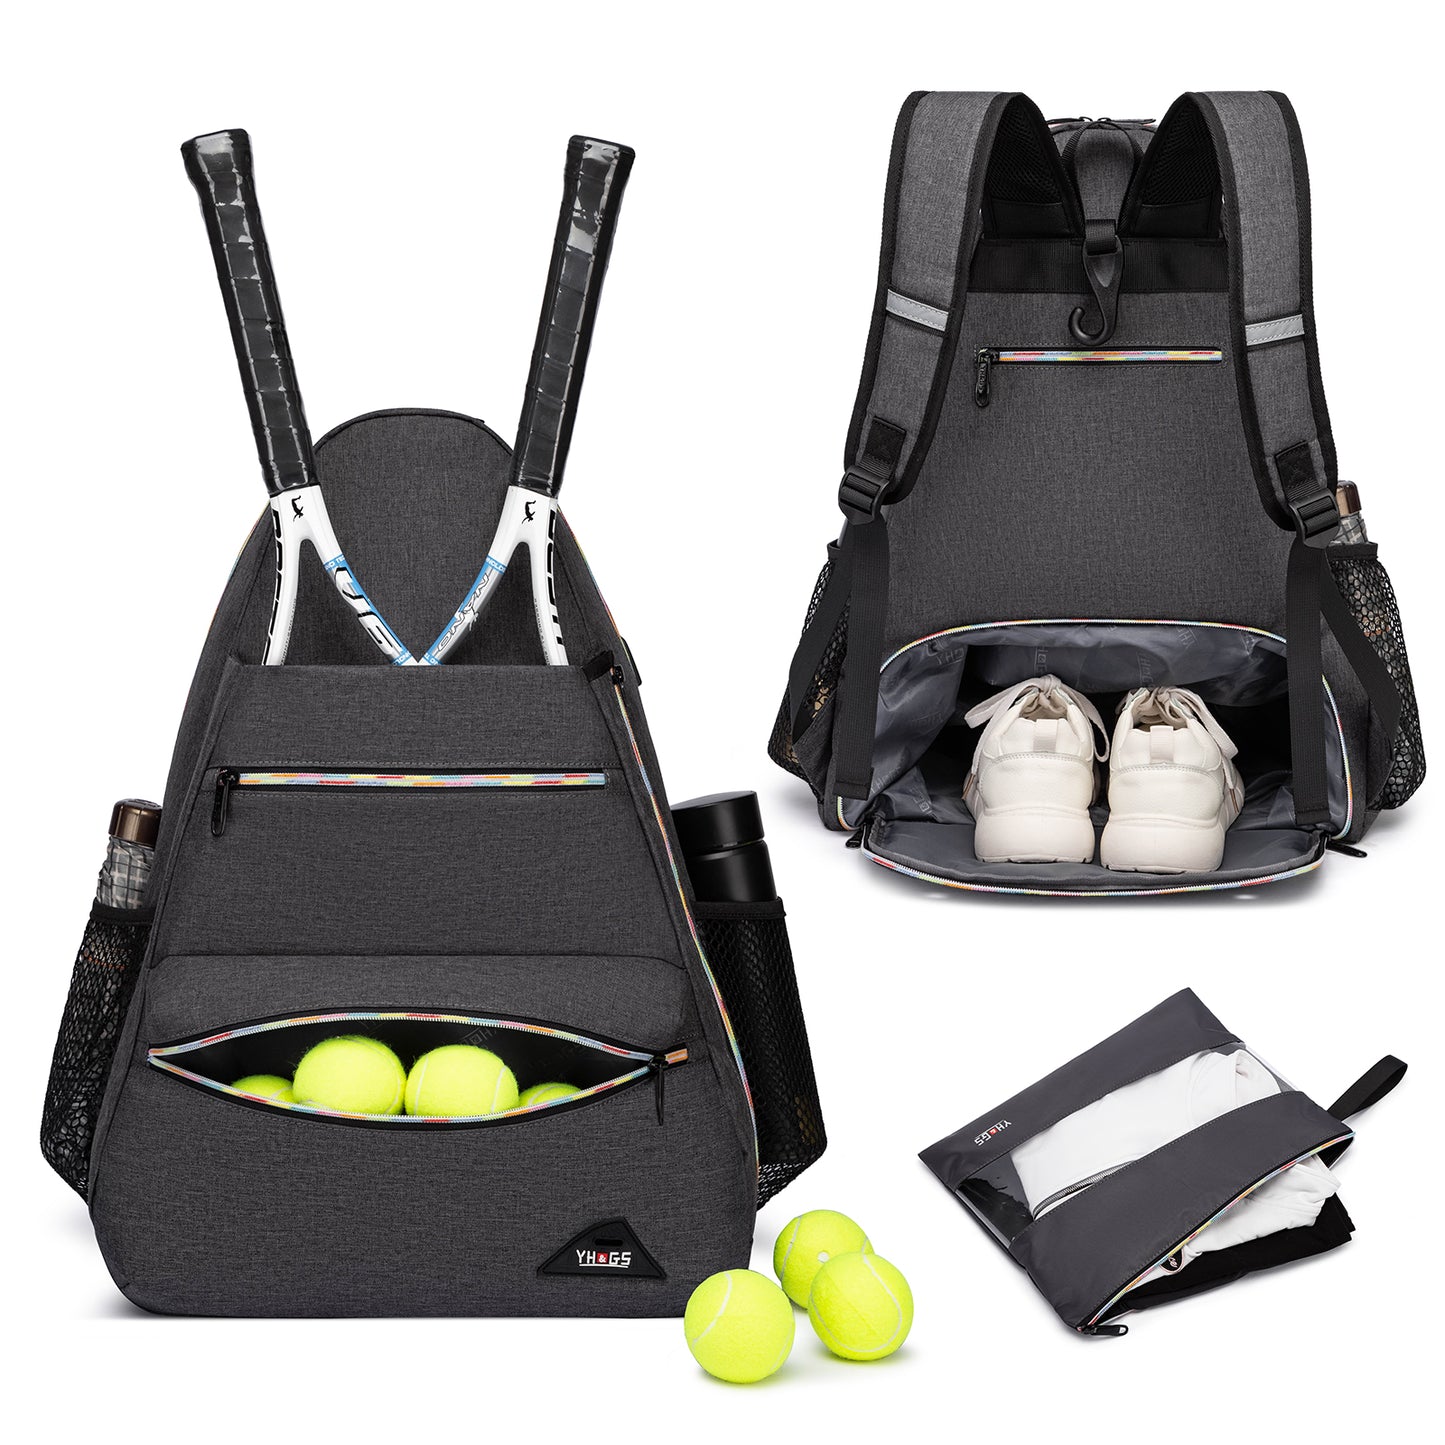 ennis Bag Tennis Backpack, Tennis Bags for Women and Men with Shoe Compartment to Hold Tennis Racket, for Pickleball Paddles, Badminton Racquet, Squash Racquet,Balls and Other Accessories